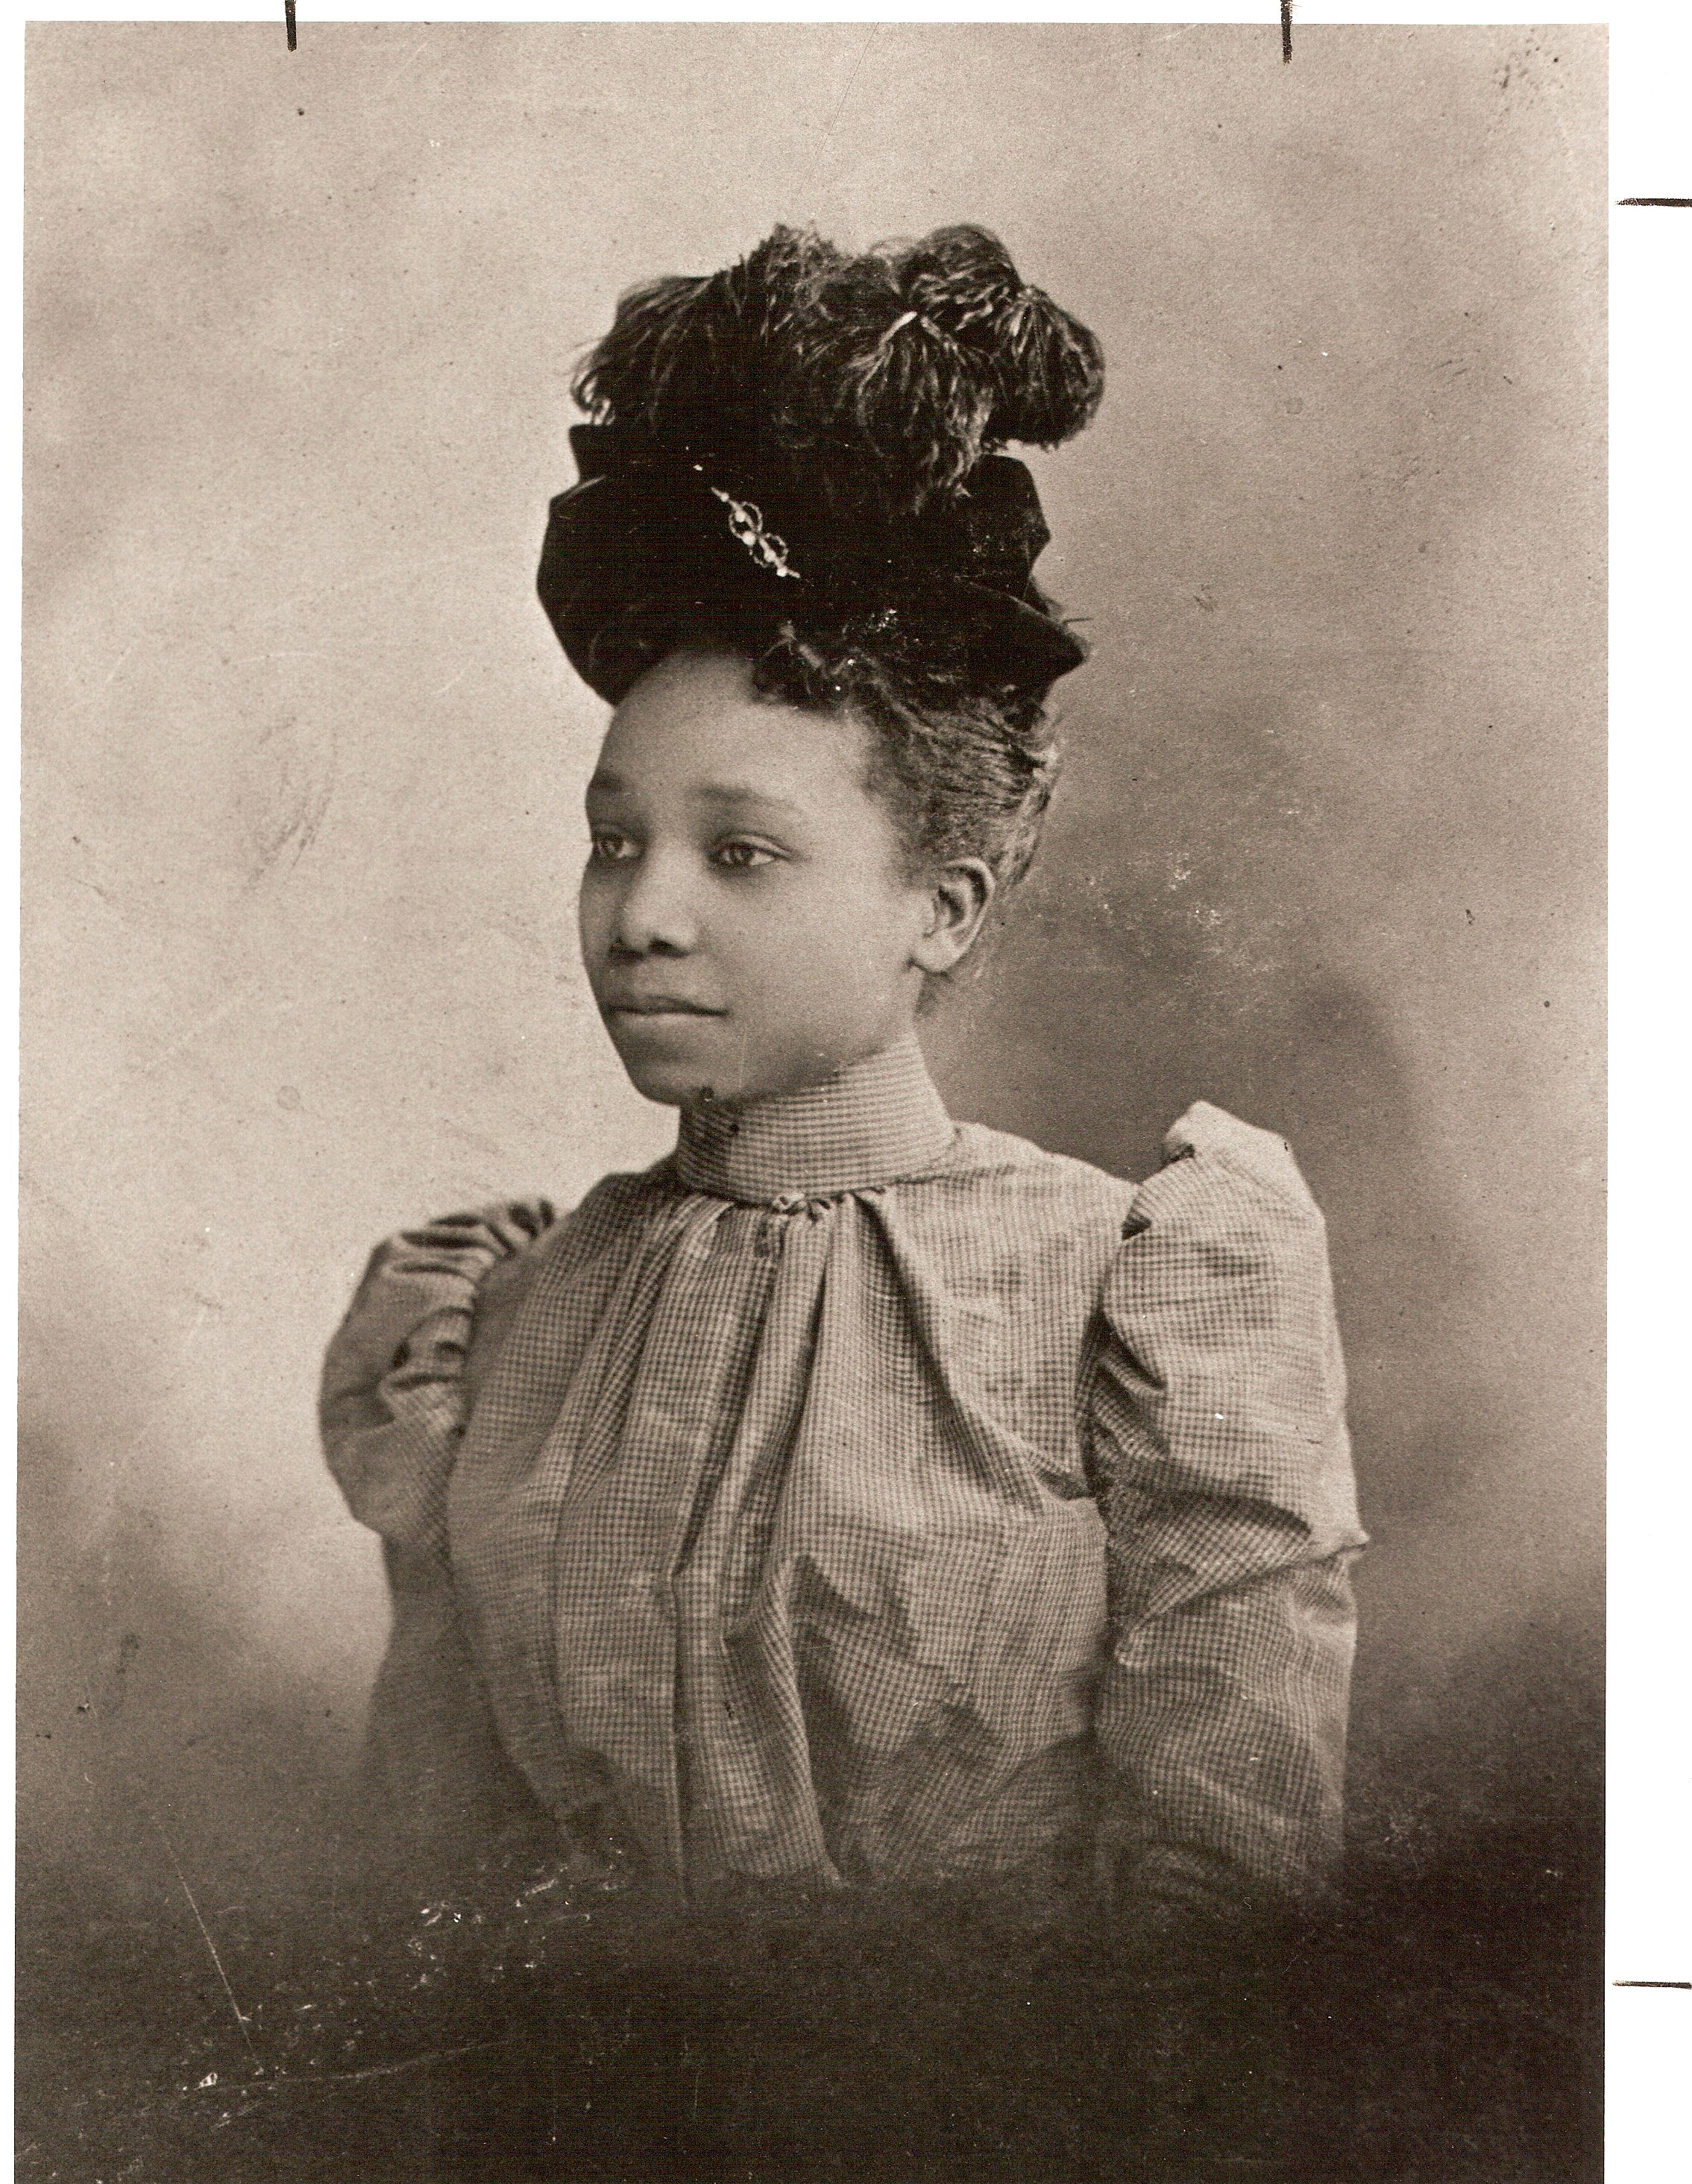 This photograph is from the Museum's Black History Collection. 